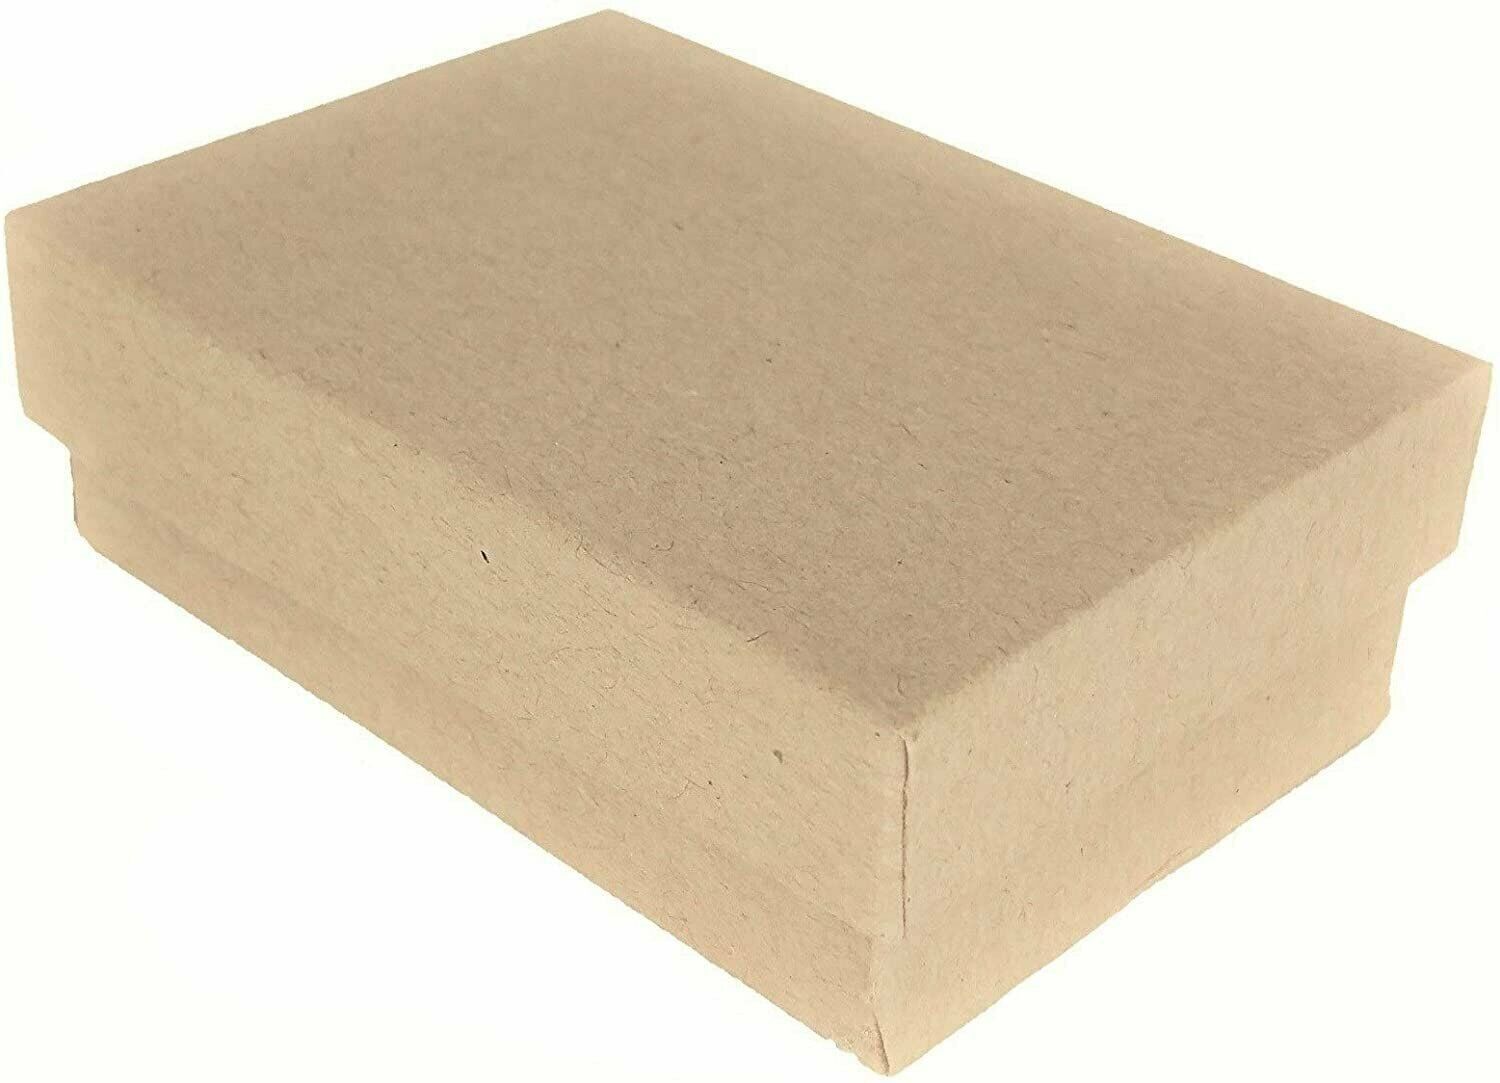 100 Boxes of Kraft Brown Cotton Filled Jewelry Packaging Gift Boxes